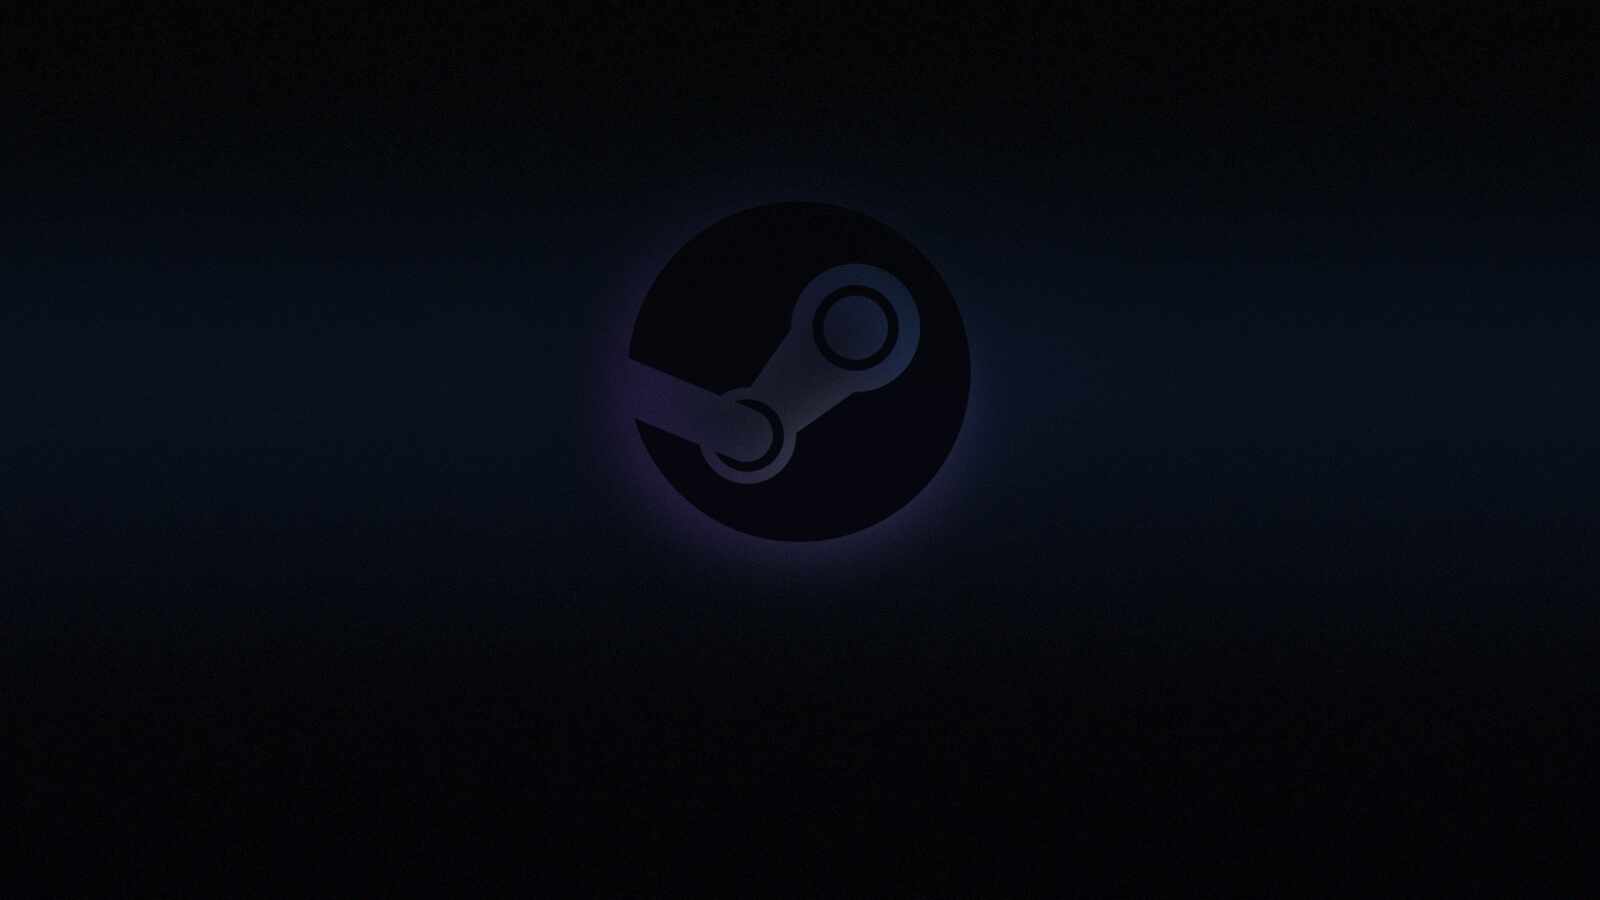 SteamOS Wallpapers and Backgrounds 4K, HD, Dual Screen